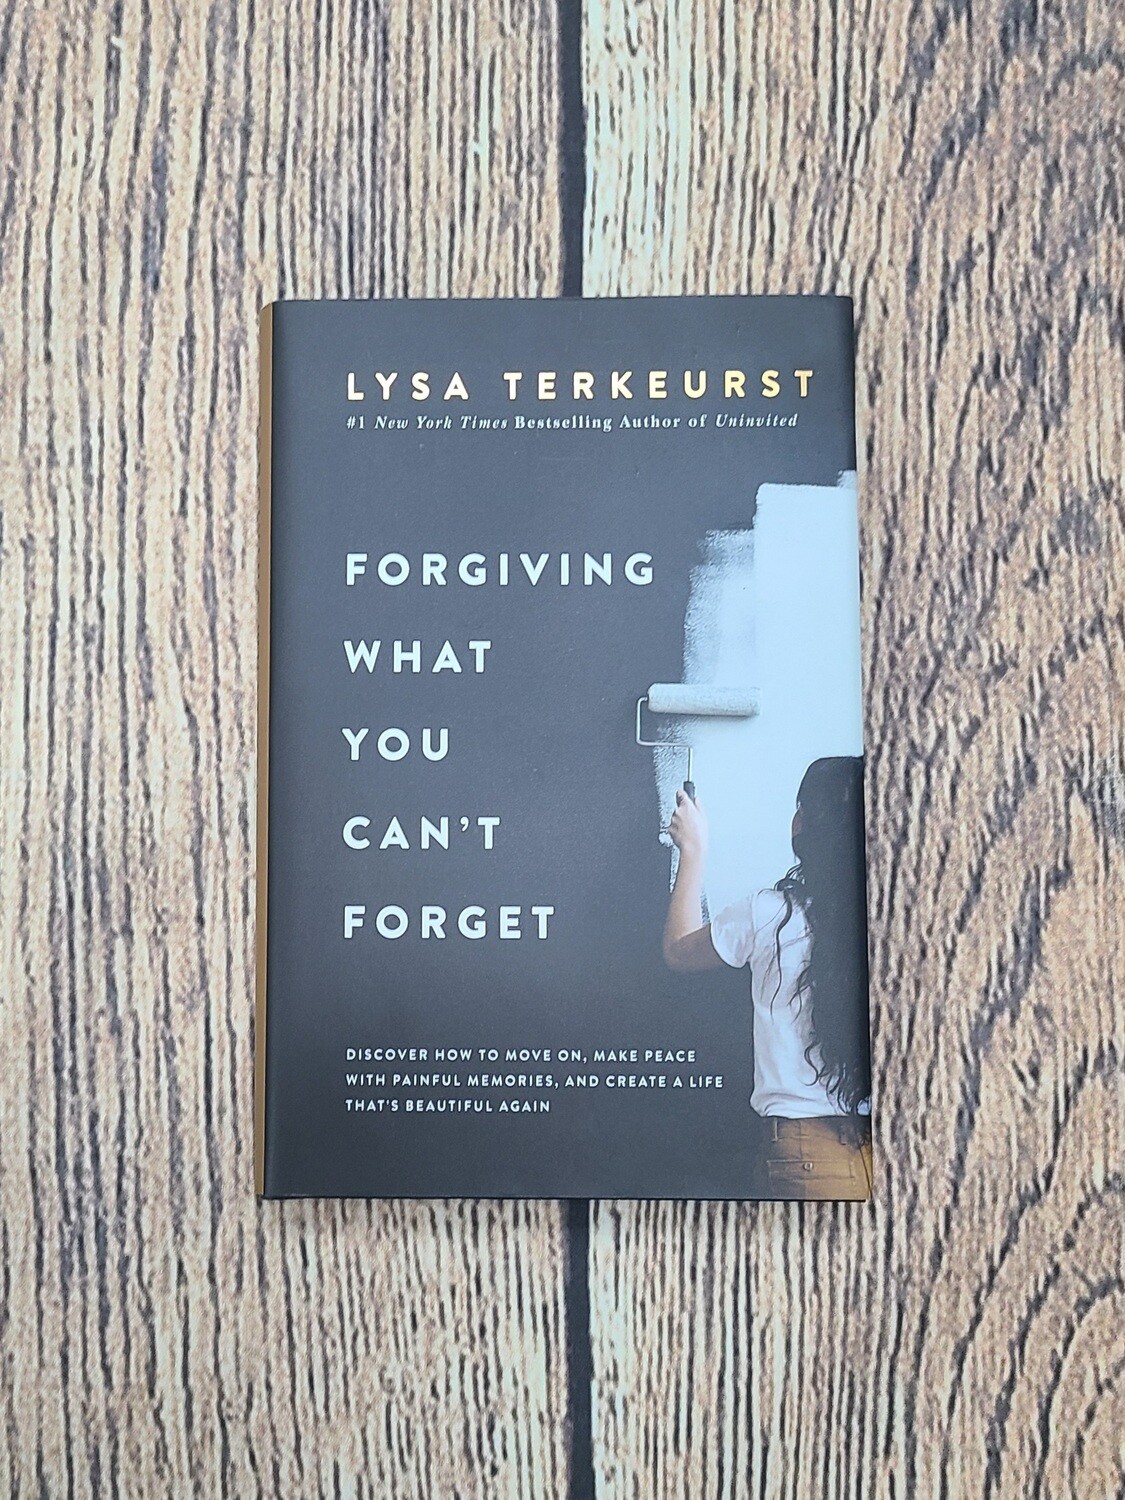 Forgiving What You Can't Forget by Lysa Terkeurst